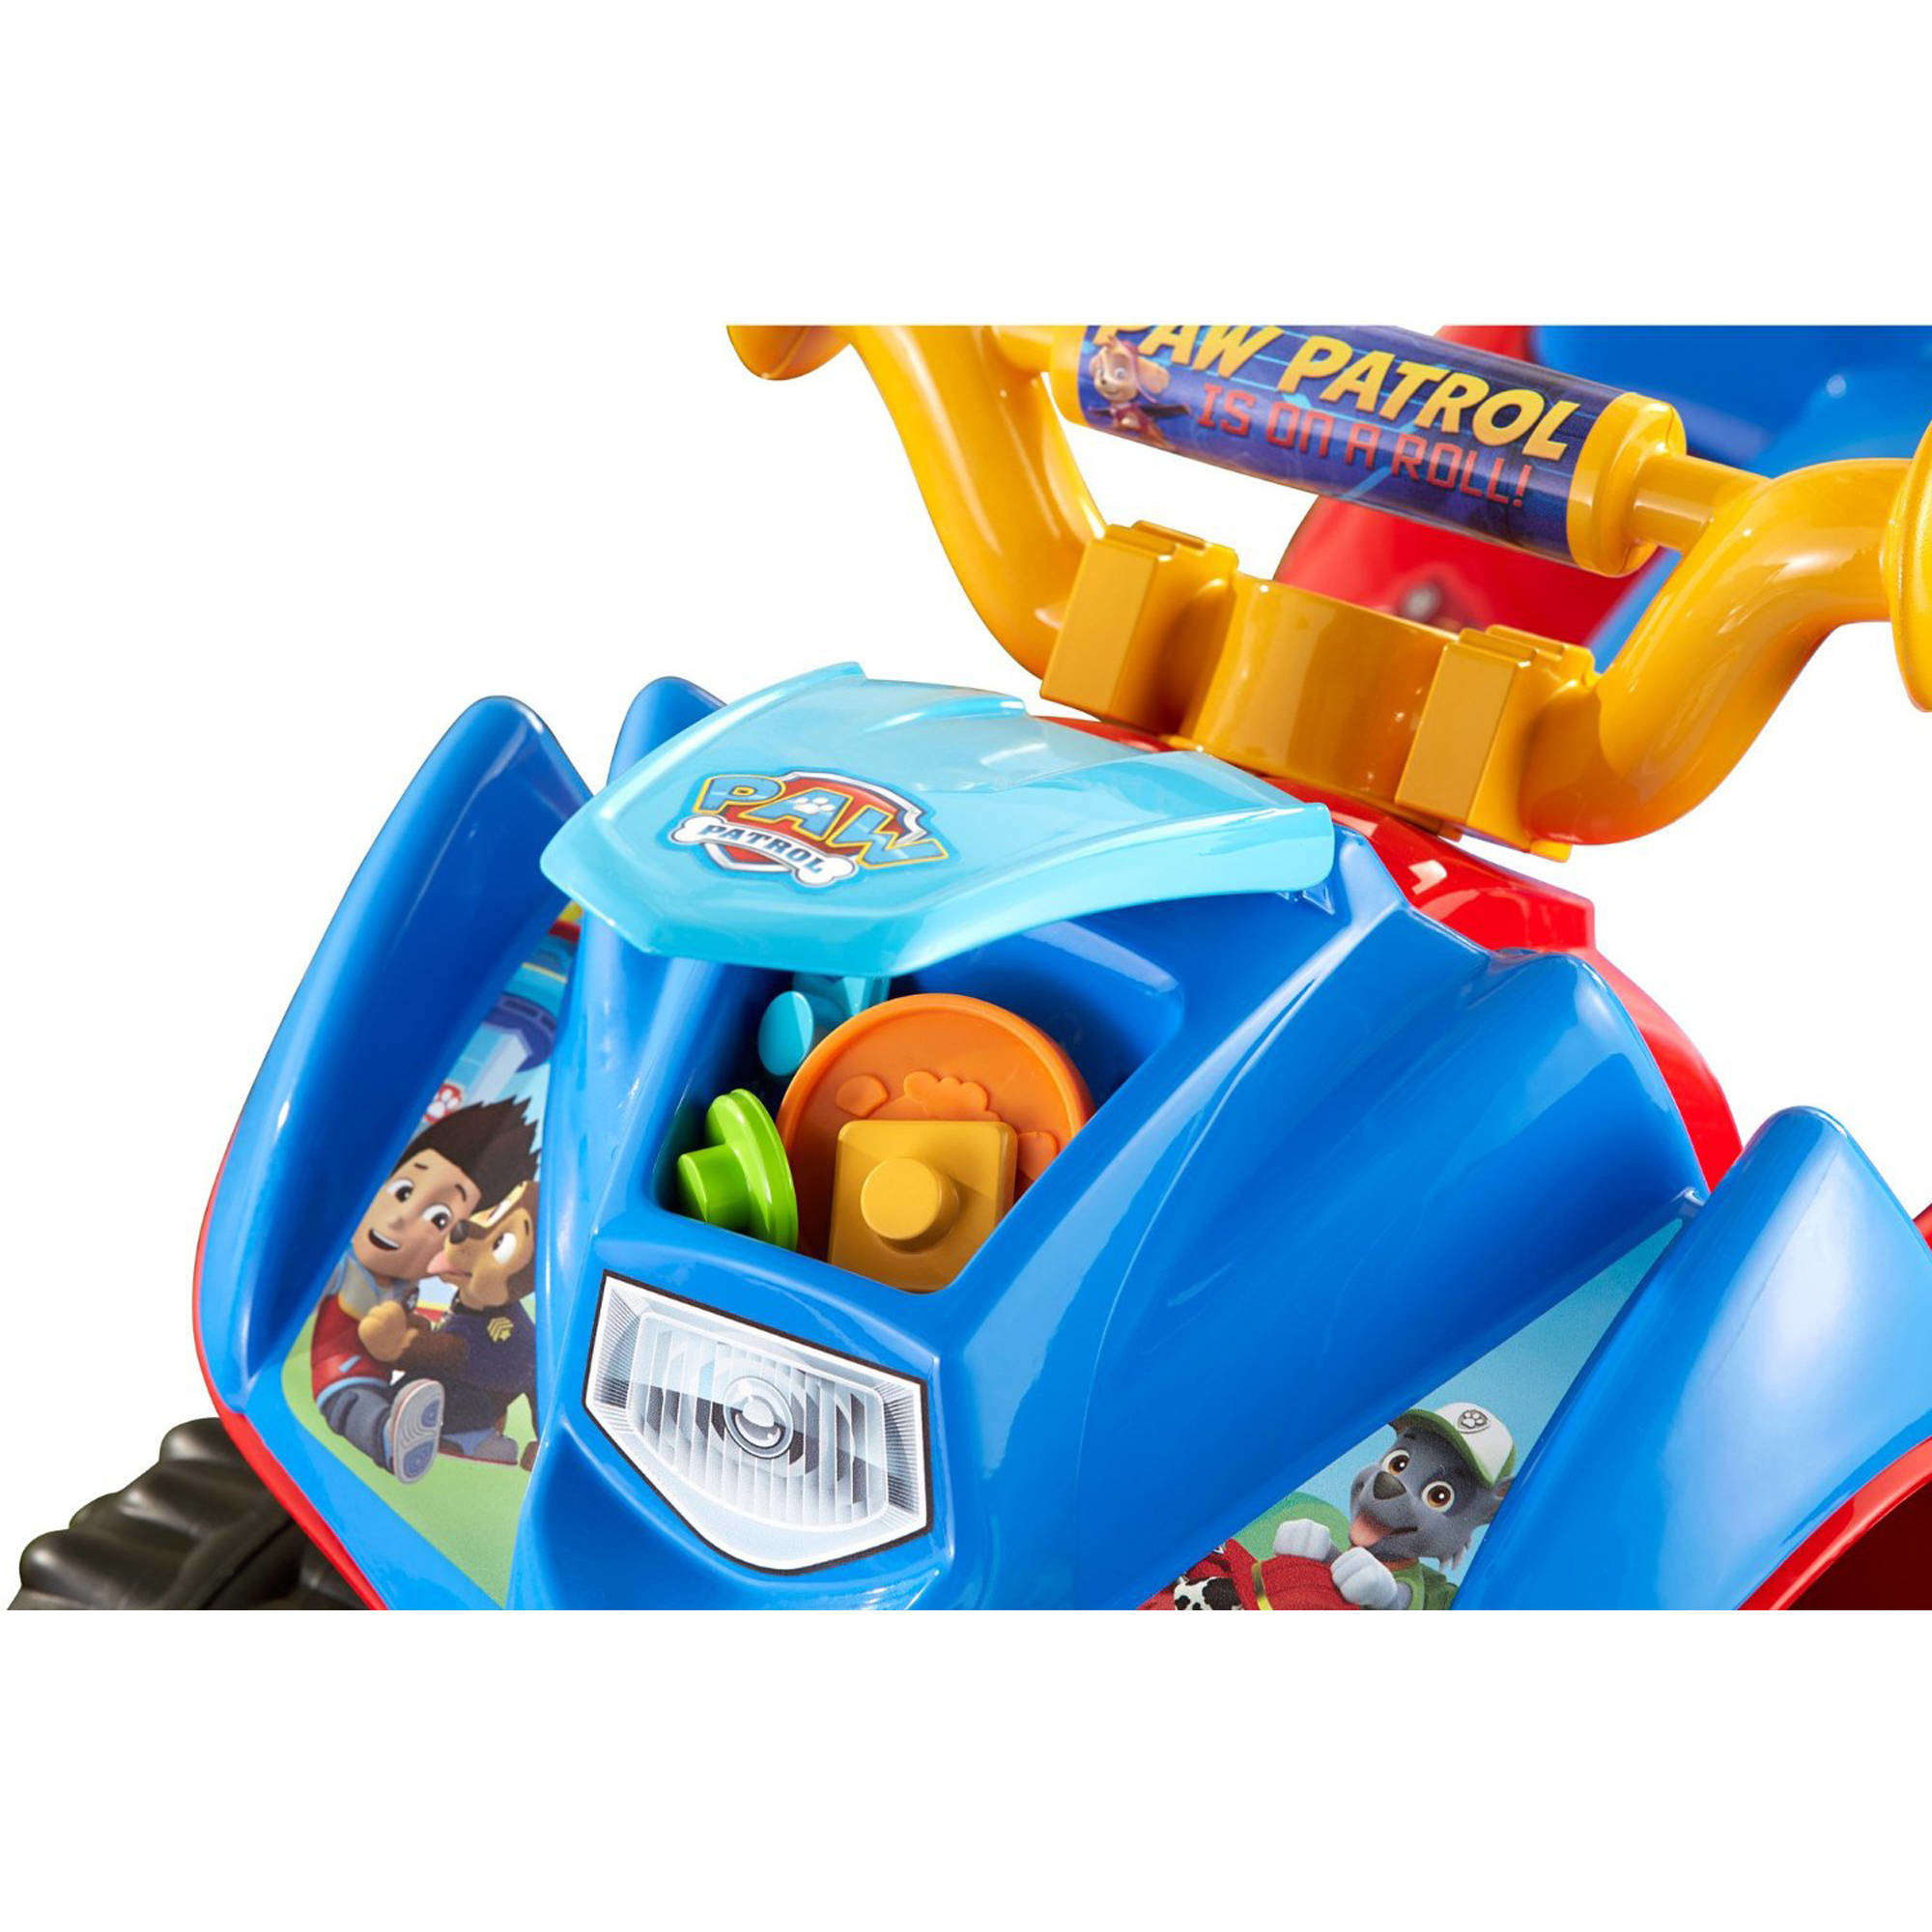 Power Wheels PAW Patrol Lil' Quad 6-Volt Battery-Powered Vehicle - image 3 of 9